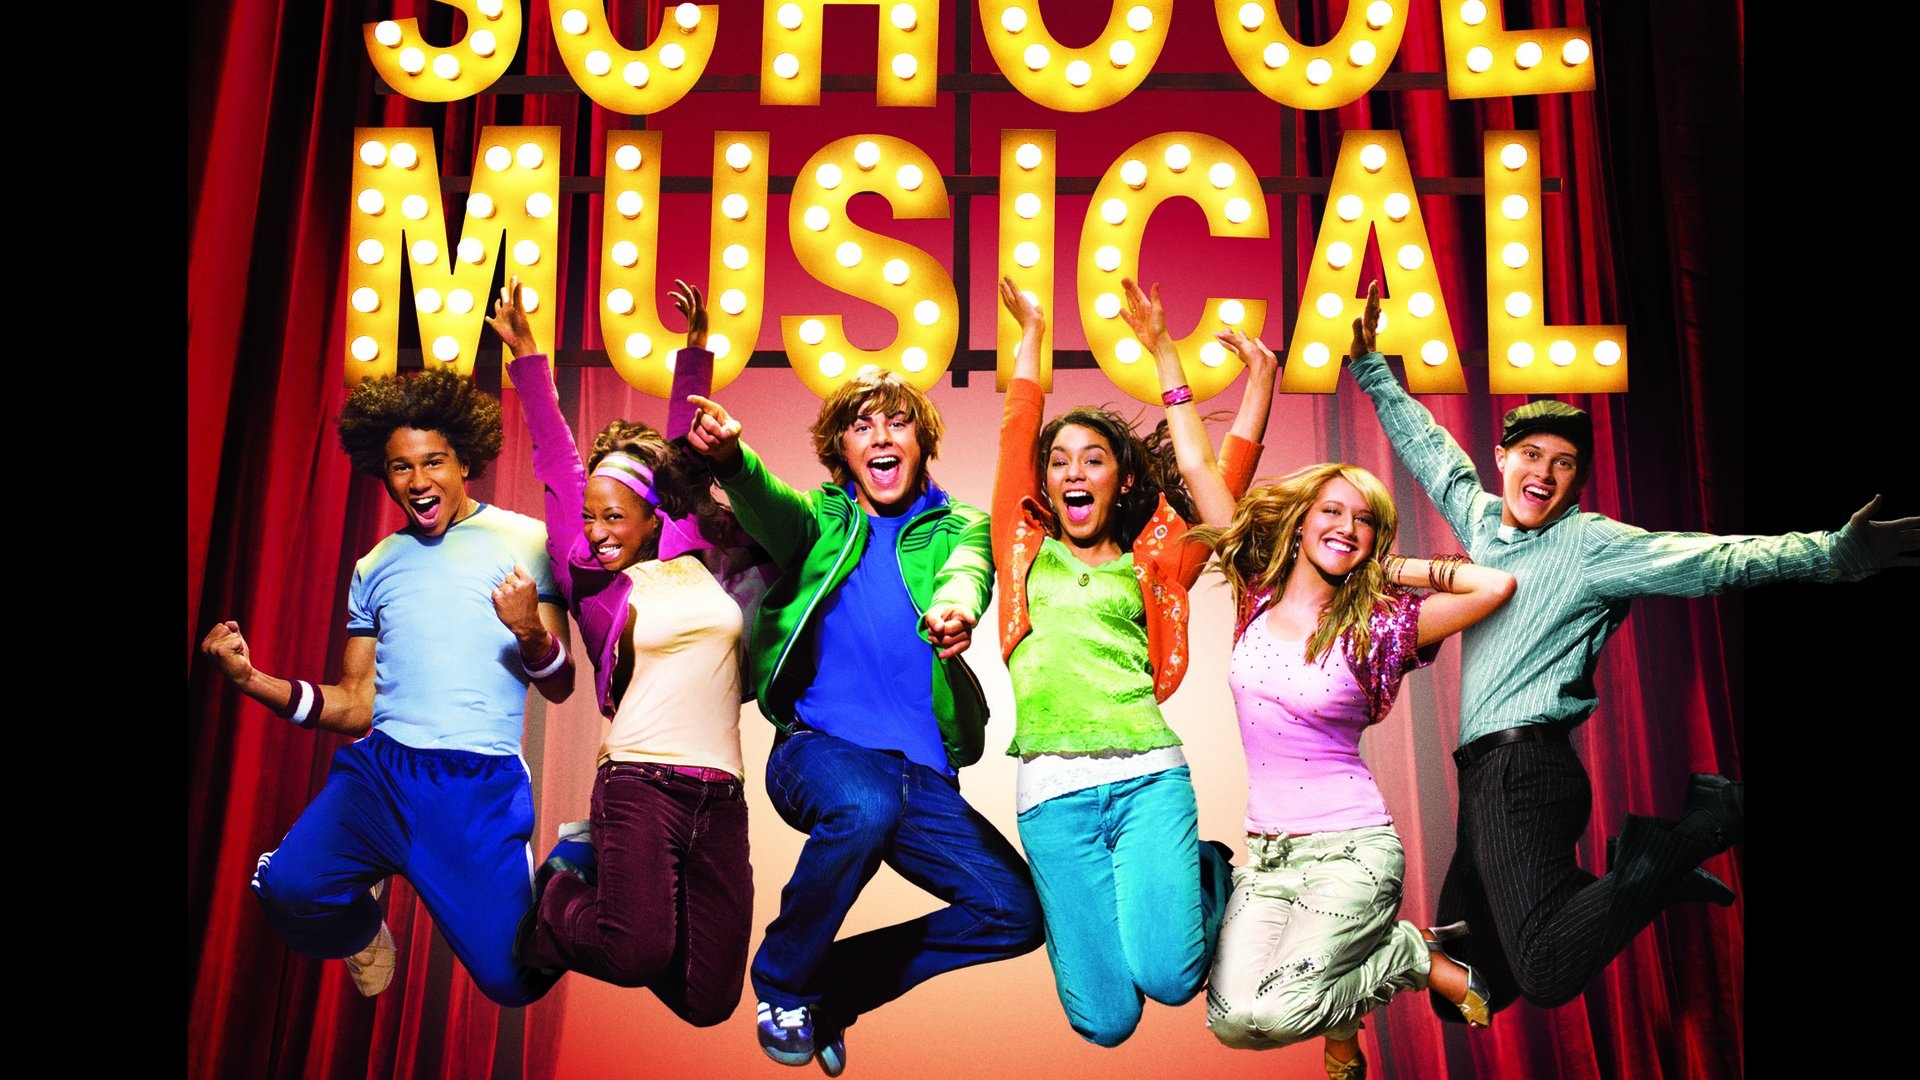 Musical: High School Musical, A 2006 American television film directed by Kenny Ortega. 1920x1080 Full HD Wallpaper.